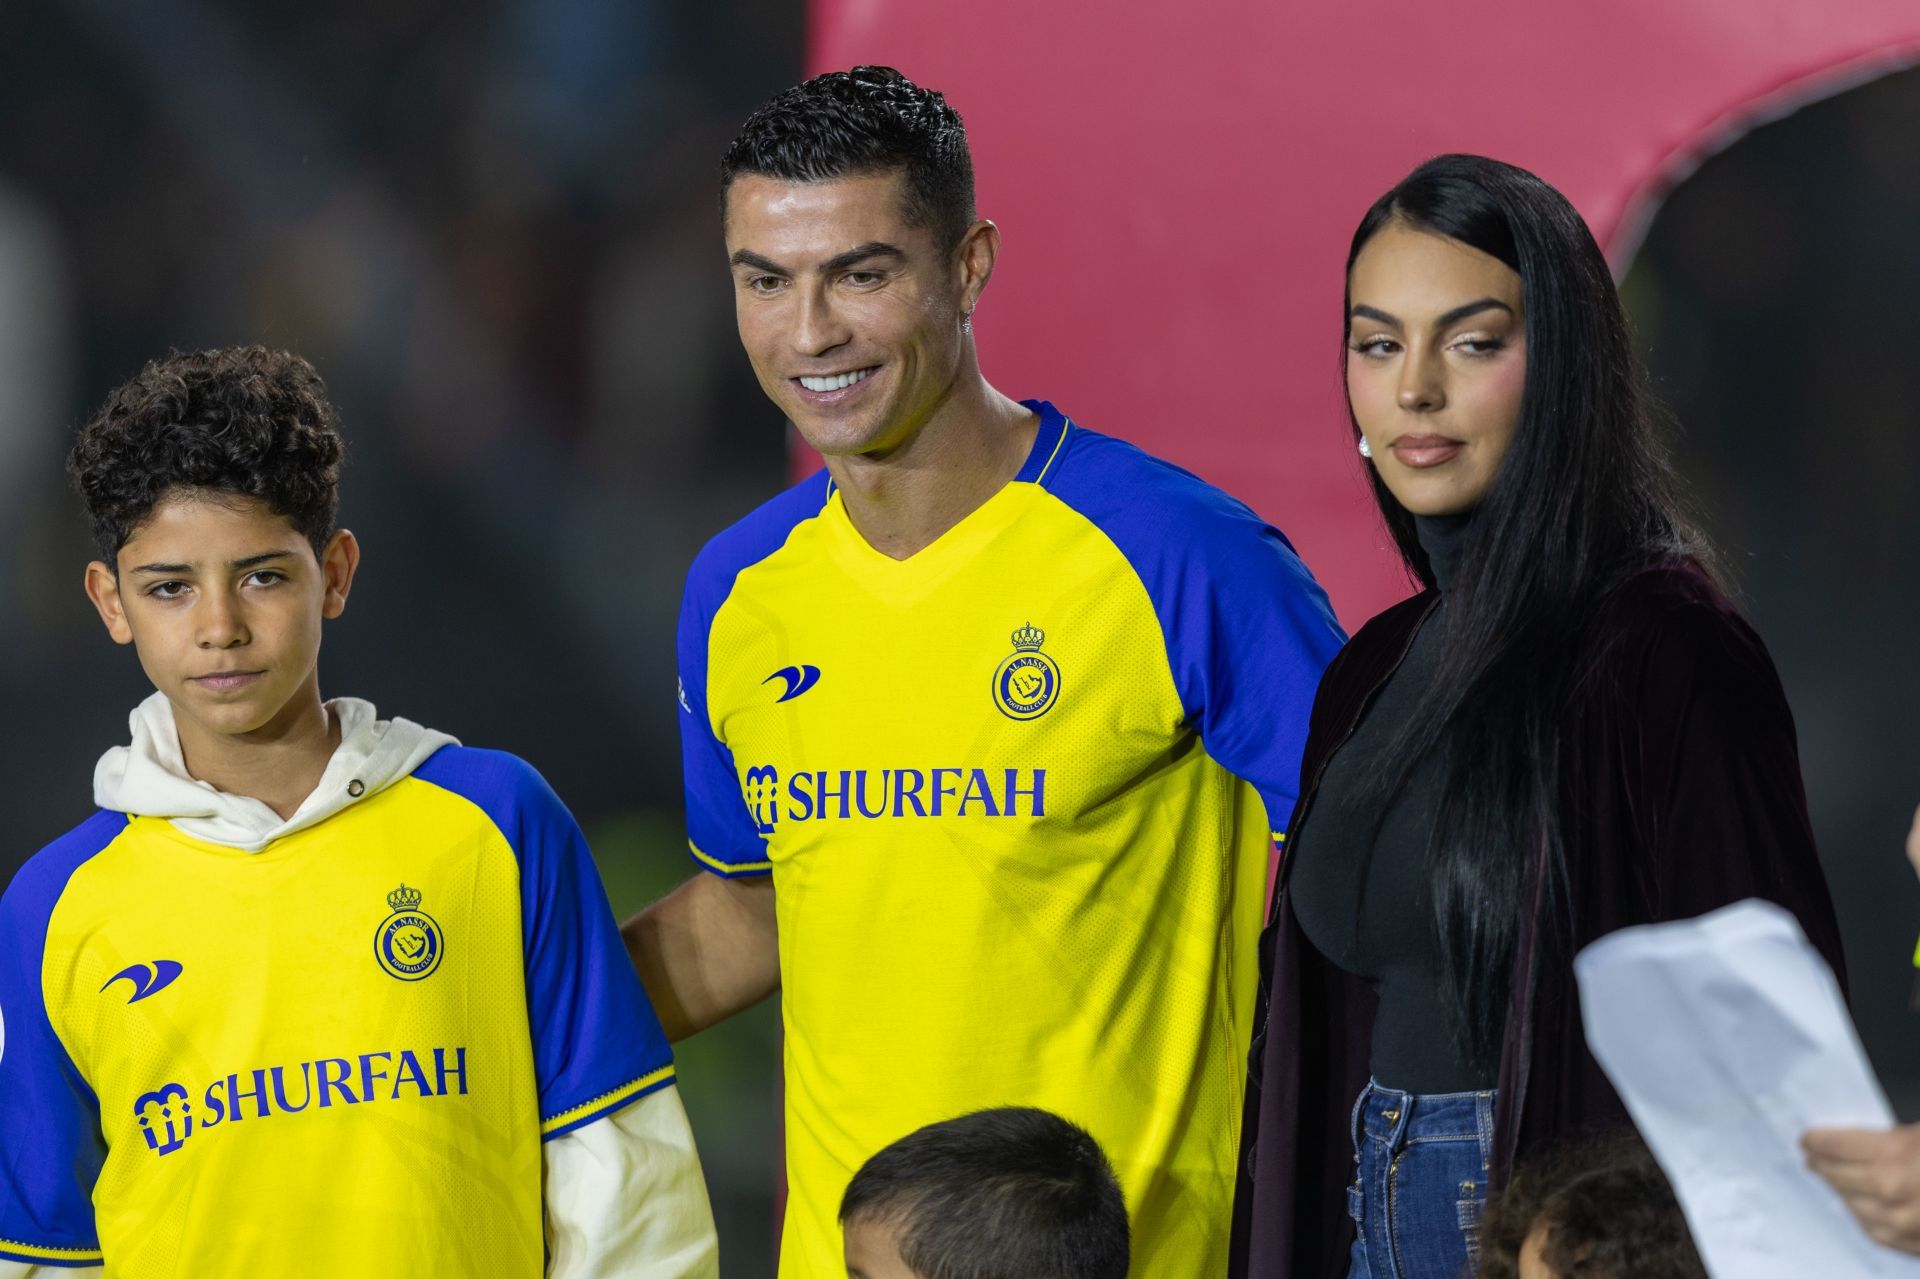 Cristiano Ronaldo is officially unveiled as Al Nassr player